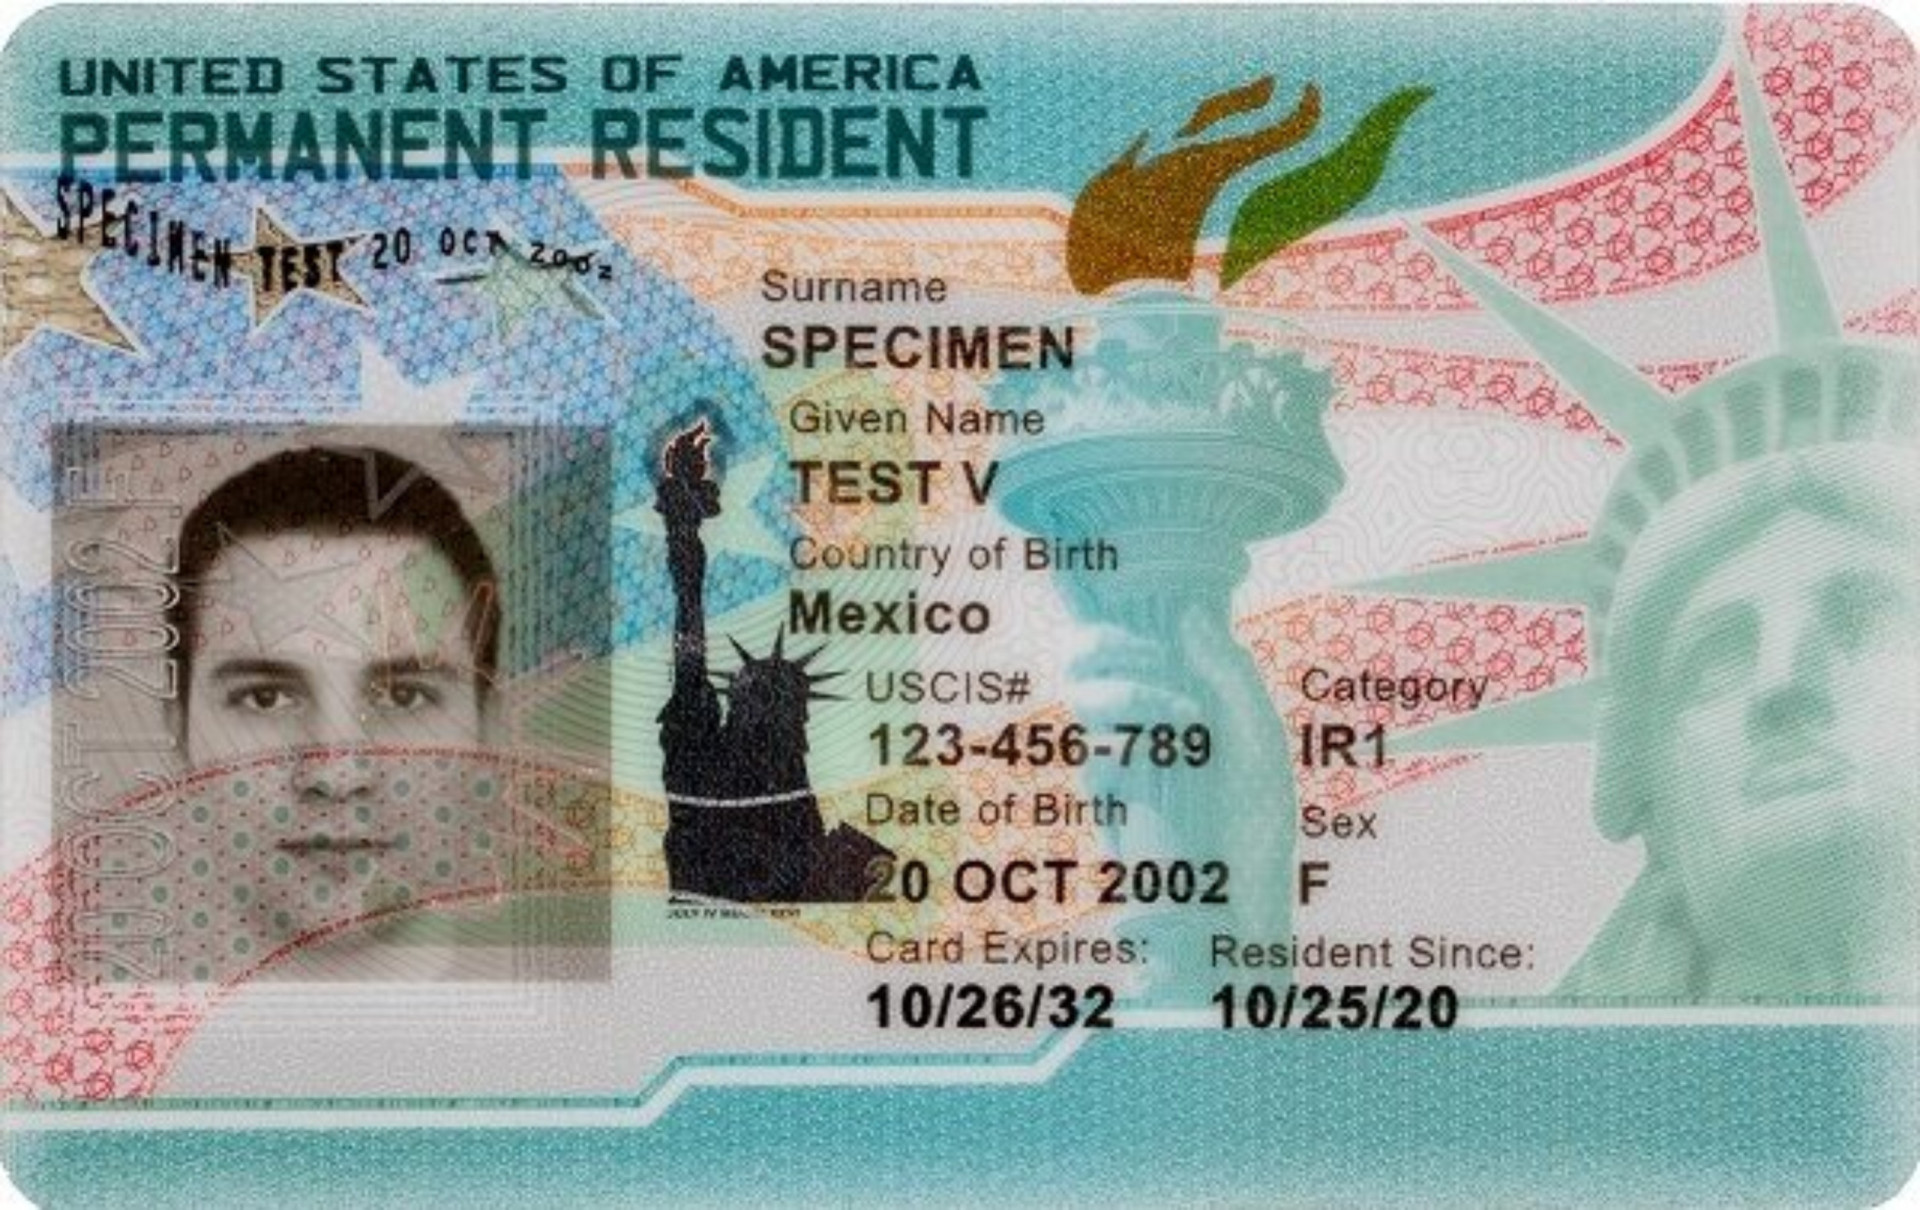 <p>A green card is a permanent resident identity document issued to immigrants in the United States. Image: United States Department of Homeland Security</p><p><a href="https://www.msn.com/en-us/community/channel/vid-7xx8mnucu55yw63we9va2gwr7uihbxwc68fxqp25x6tg4ftibpra?cvid=94631541bc0f4f89bfd59158d696ad7e">Follow us and access great exclusive content every day</a></p>